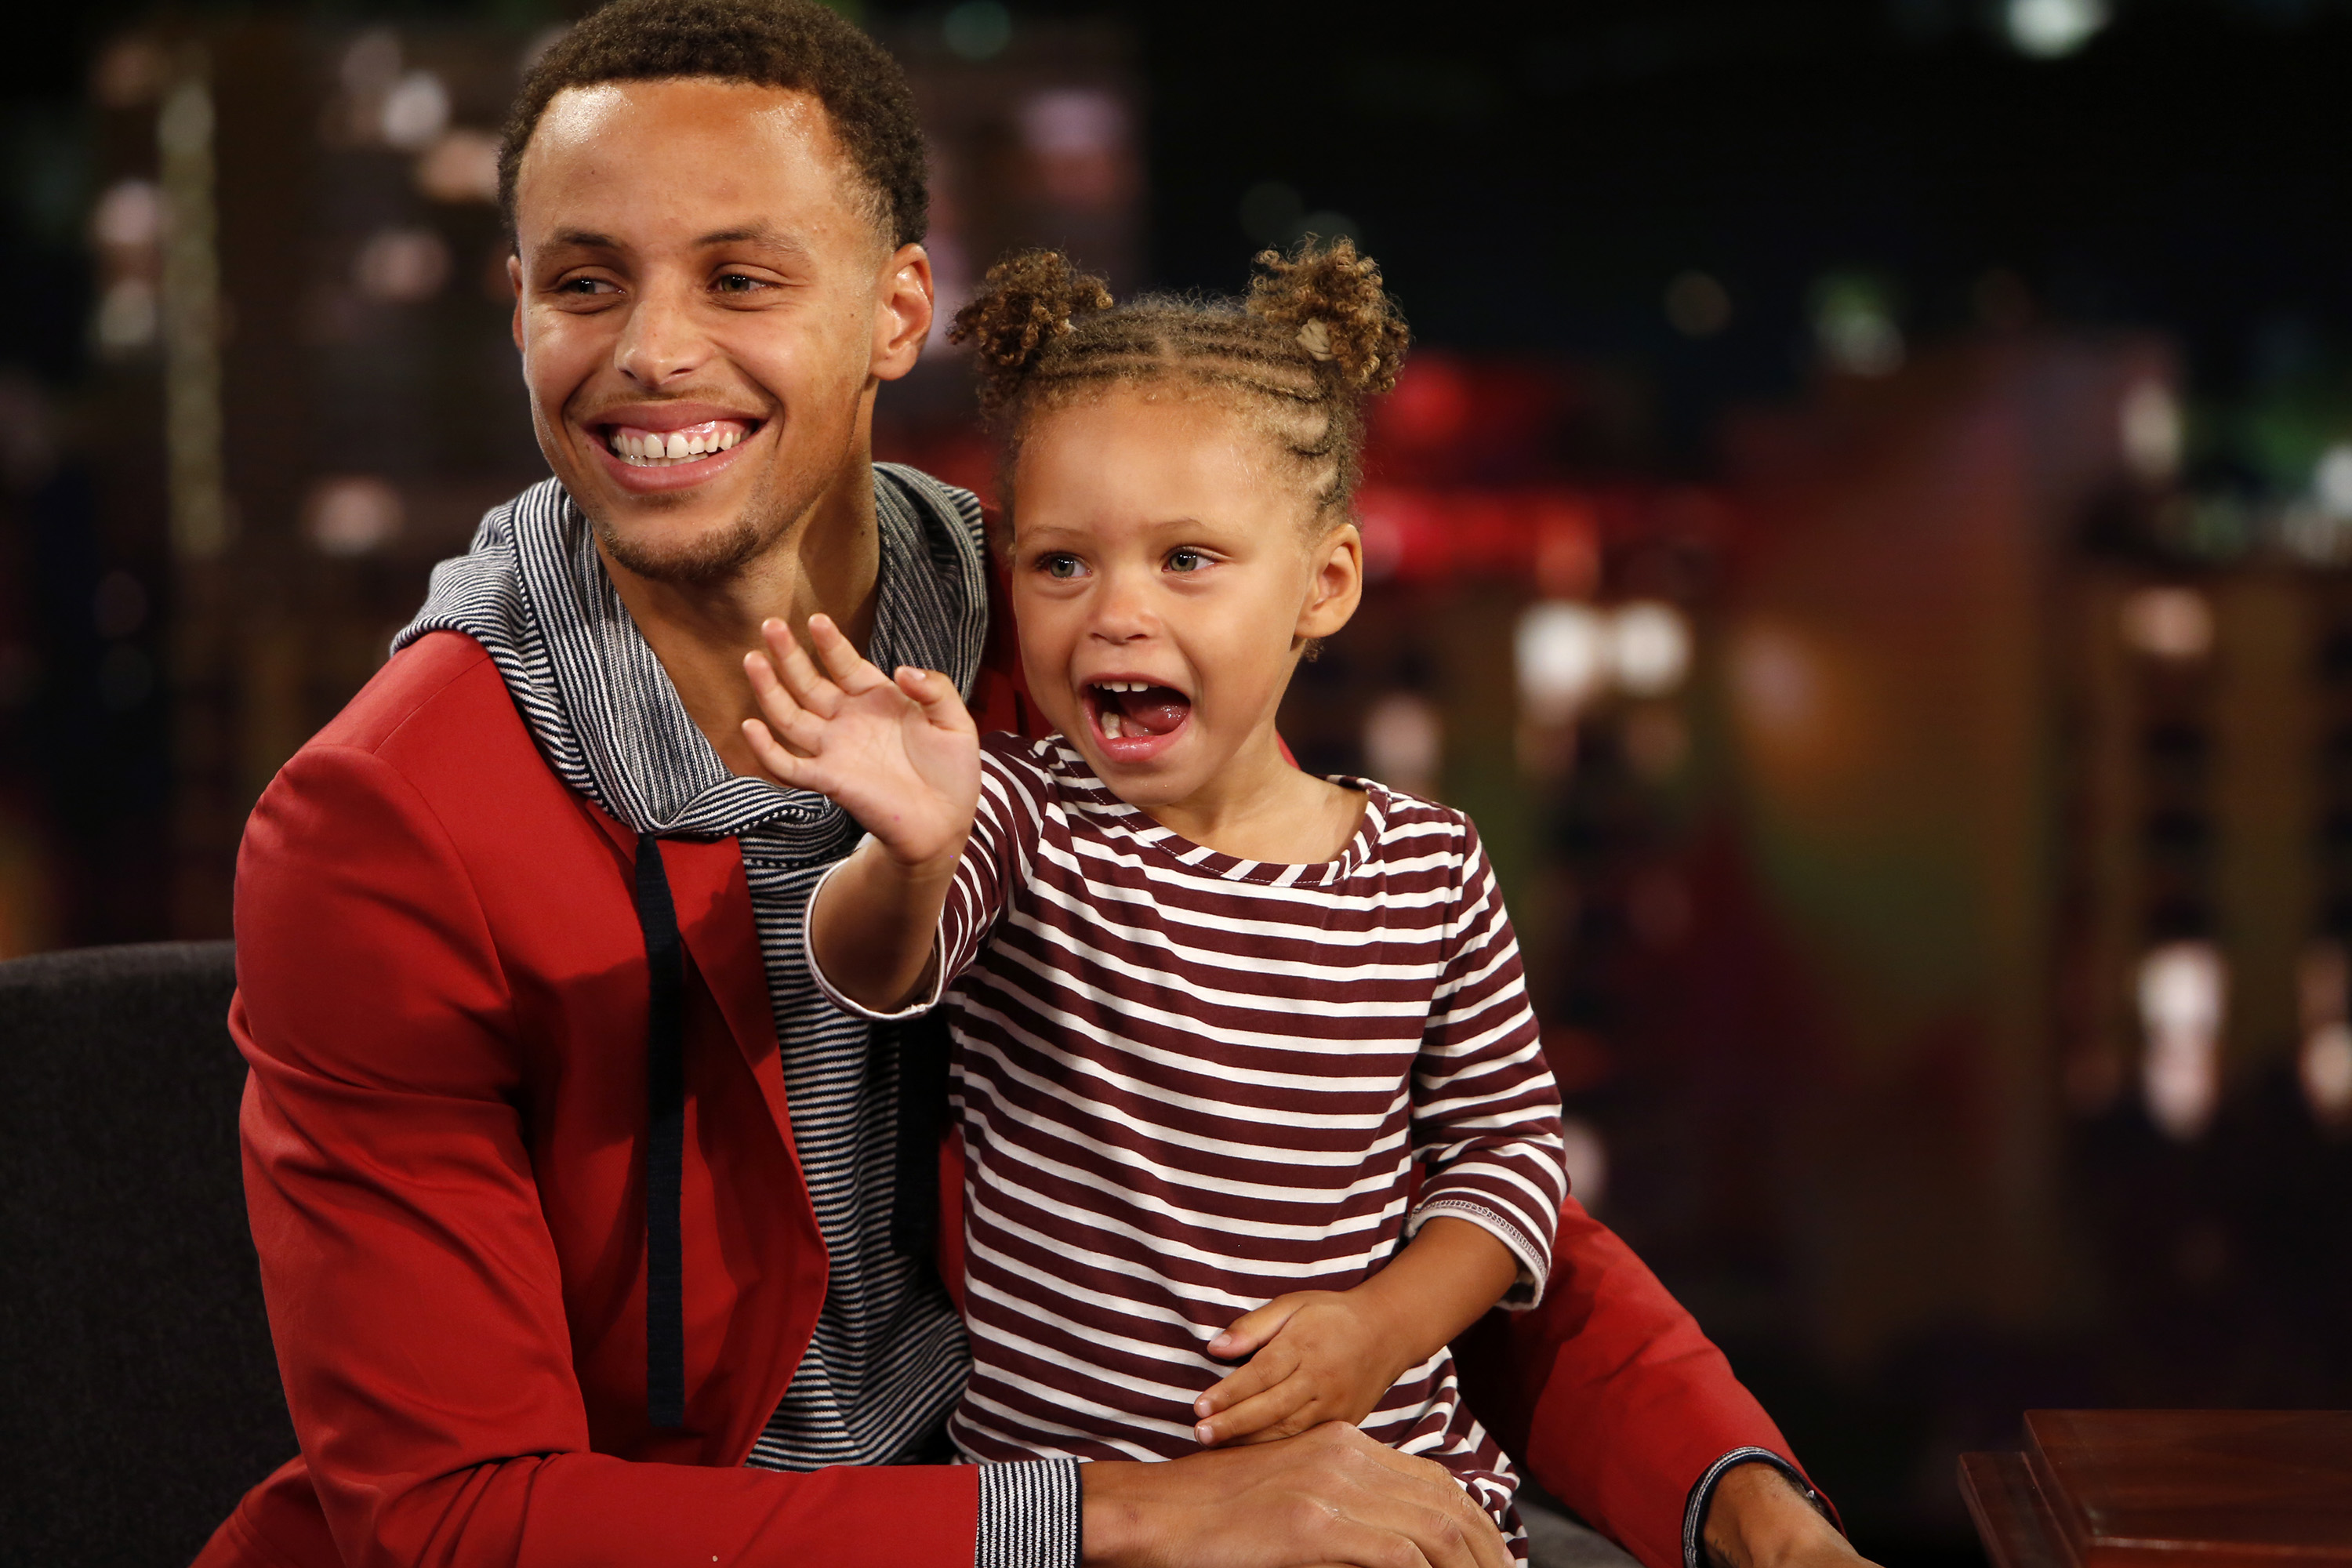 Stephen Curry and Riley Curry in 2015 Jimmy Kimmel